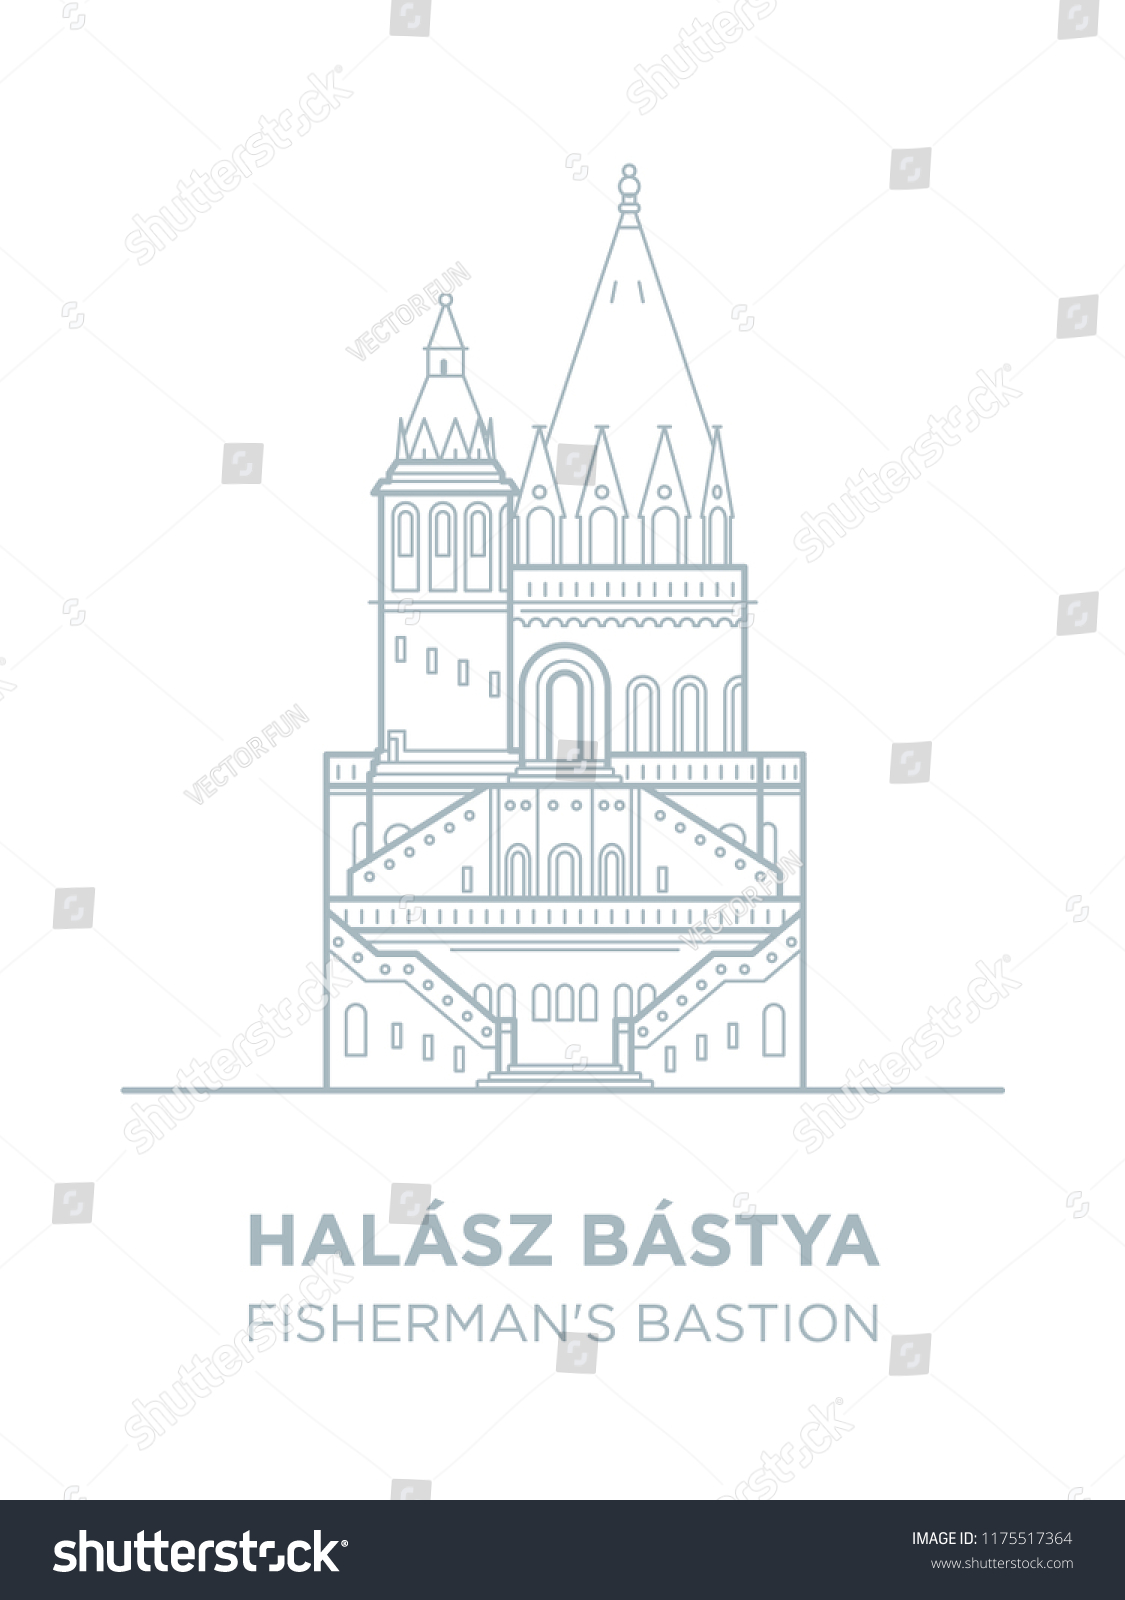 SVG of Fisherman's bastion towers in Hungary capital icon. Vector art illustration flat design. Budapest famous architectural landmark thin line illustration. Hungarian tourist destination you have to visit svg